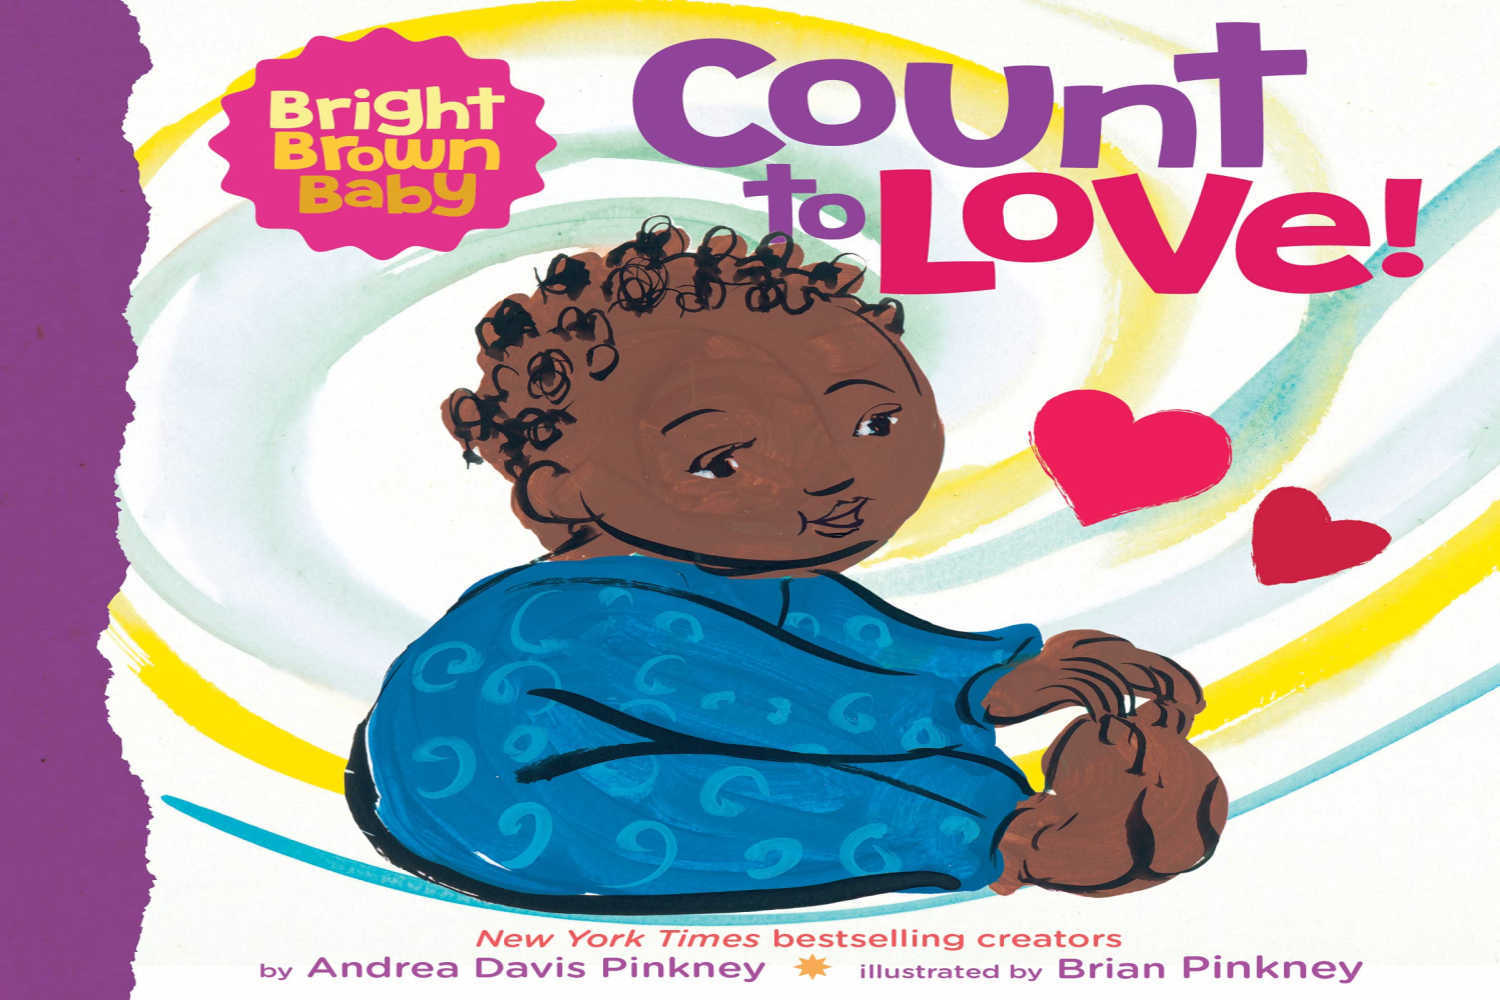 Count to Love by Andrea Pinkney